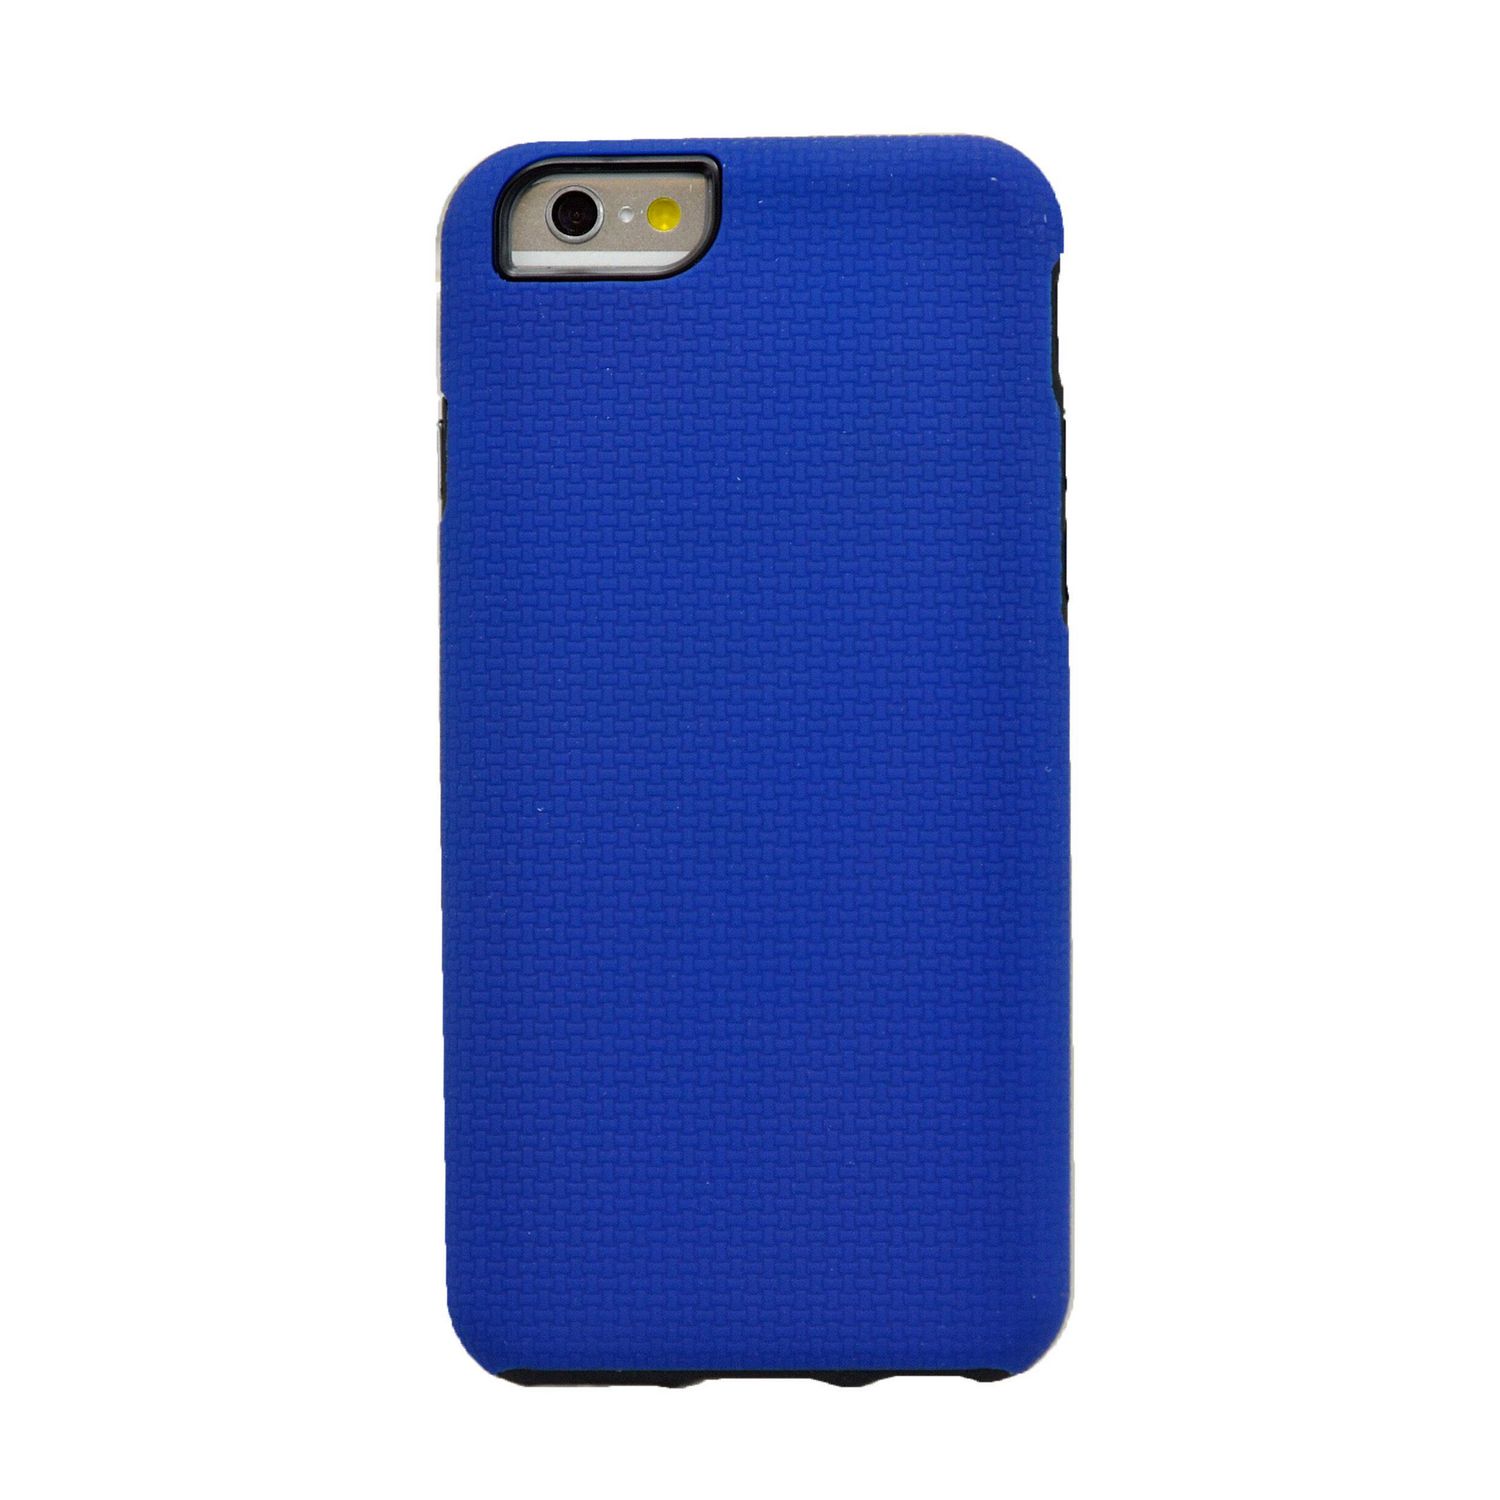 blackweb Luxe Shell Case for iPhone 6/6s in Blue | Walmart Canada